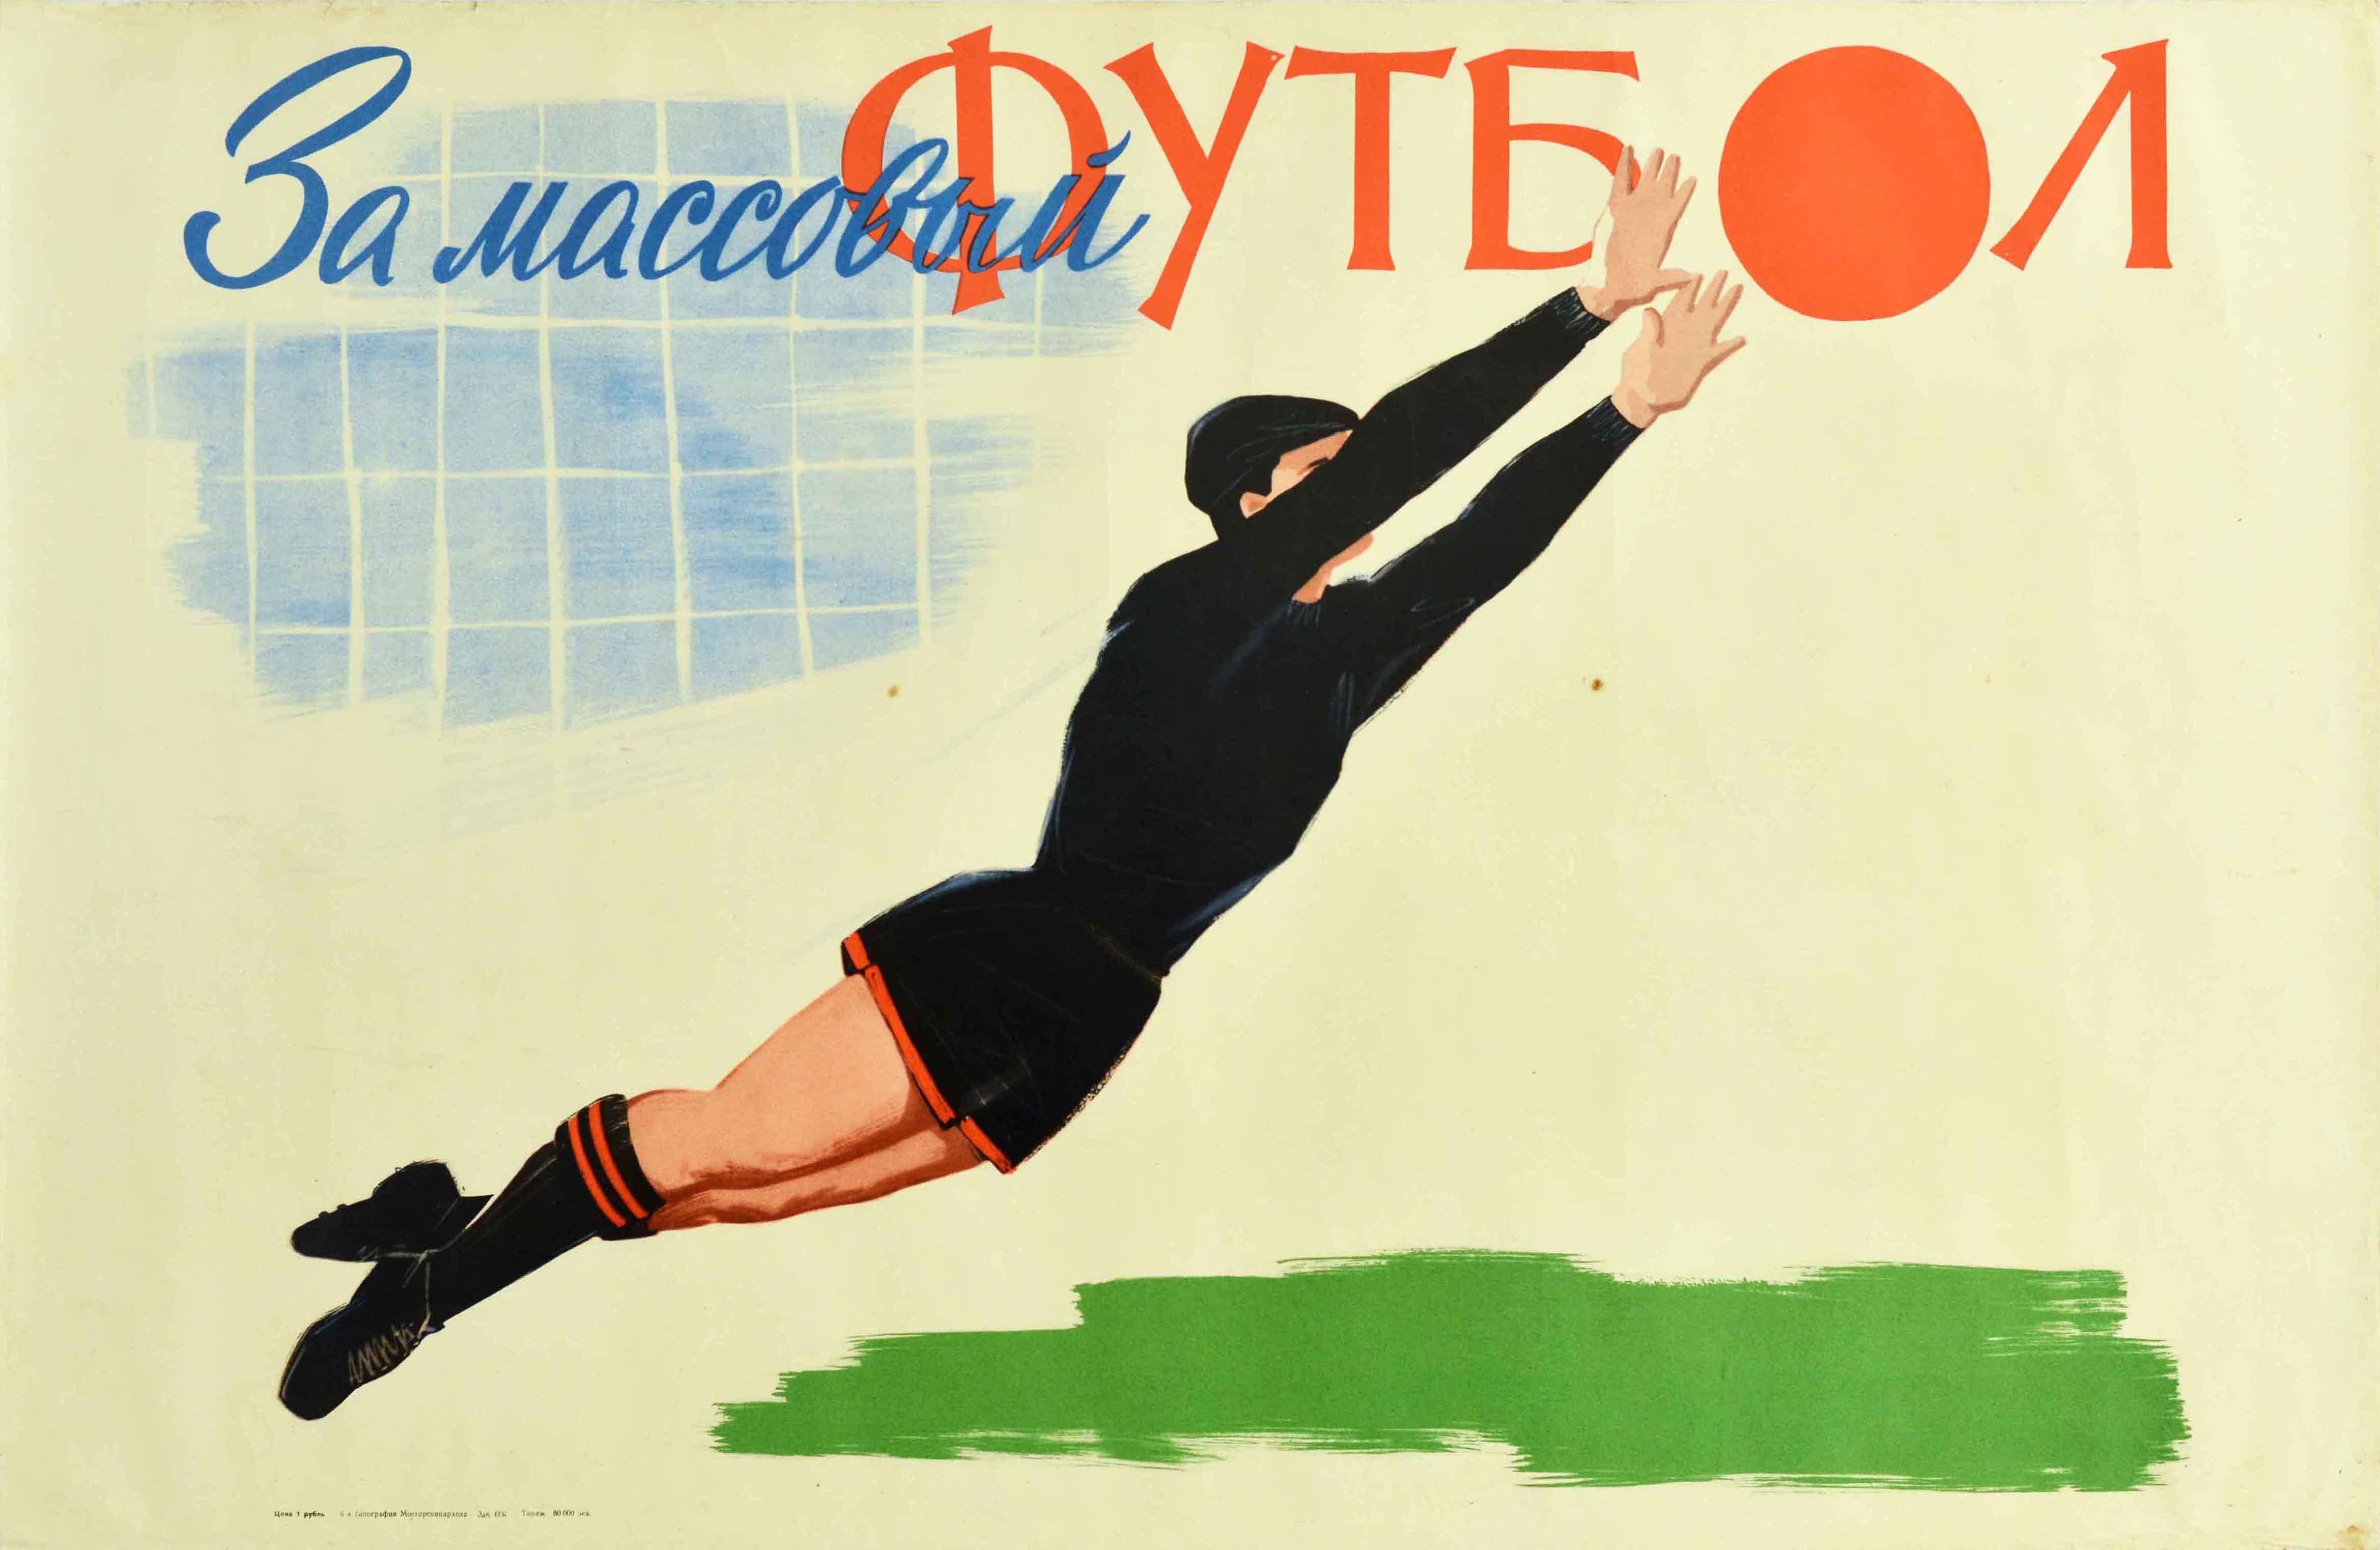 Original vintage Soviet sport poster - For grassroots football / ?? ???????? ?????? - featuring an illustration of a goalkeeper in black uniform depicted mid-jump catching the ball and saving it from the goal, the ball as the letter O forming part